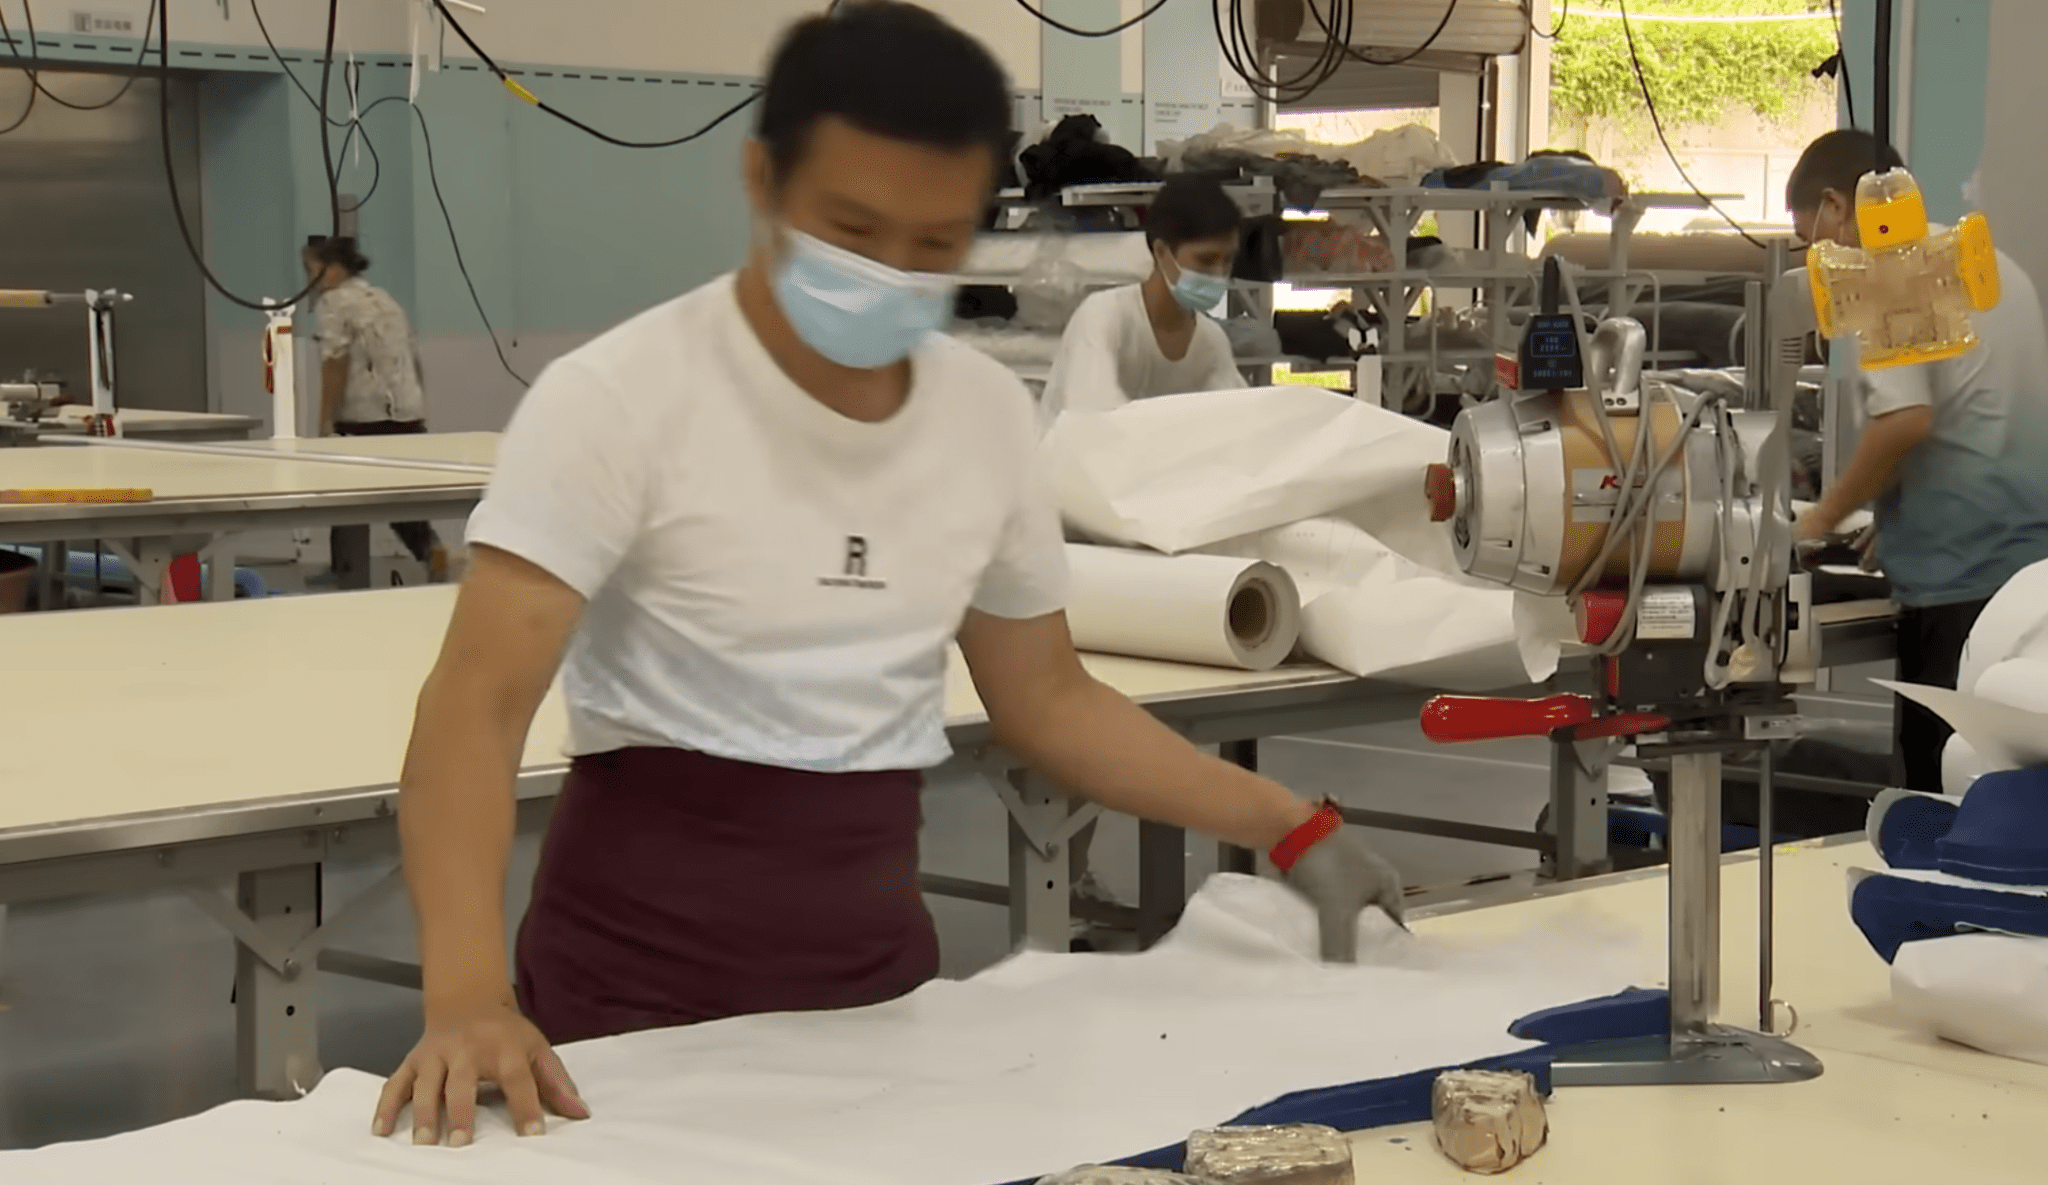 Clothing made in China